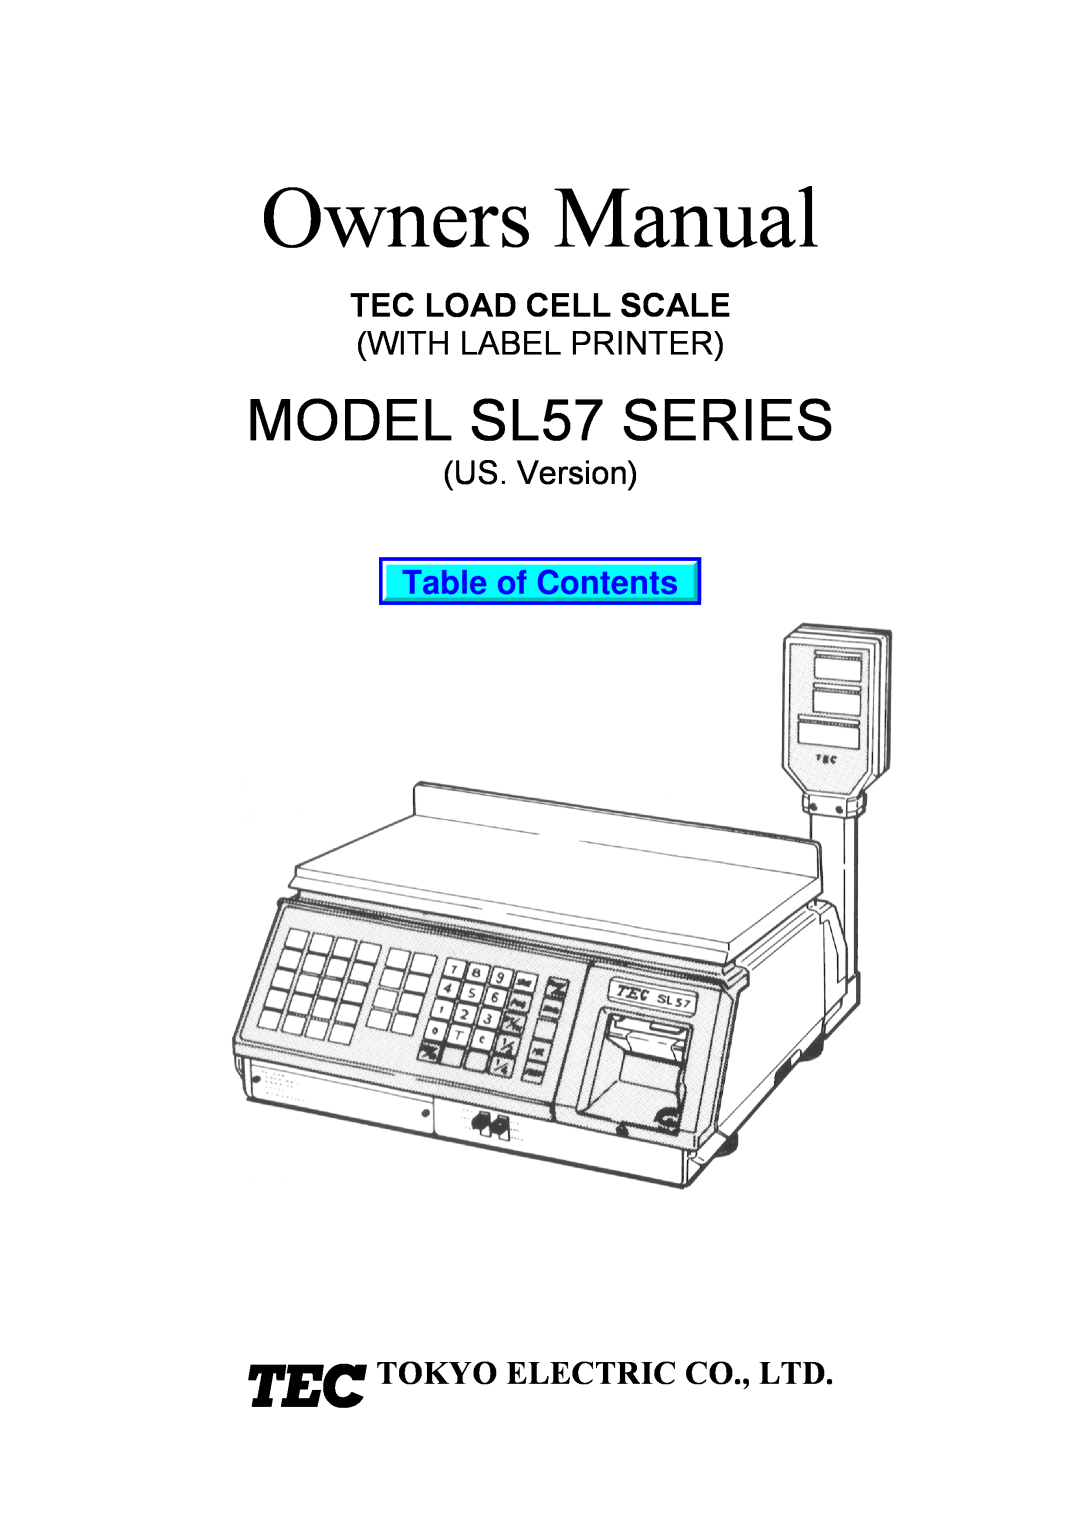 Toshiba owner manual With Label Printer, US. Version, MODEL SL57 SERIES, Tec Load Cell Scale, Table of Contents 